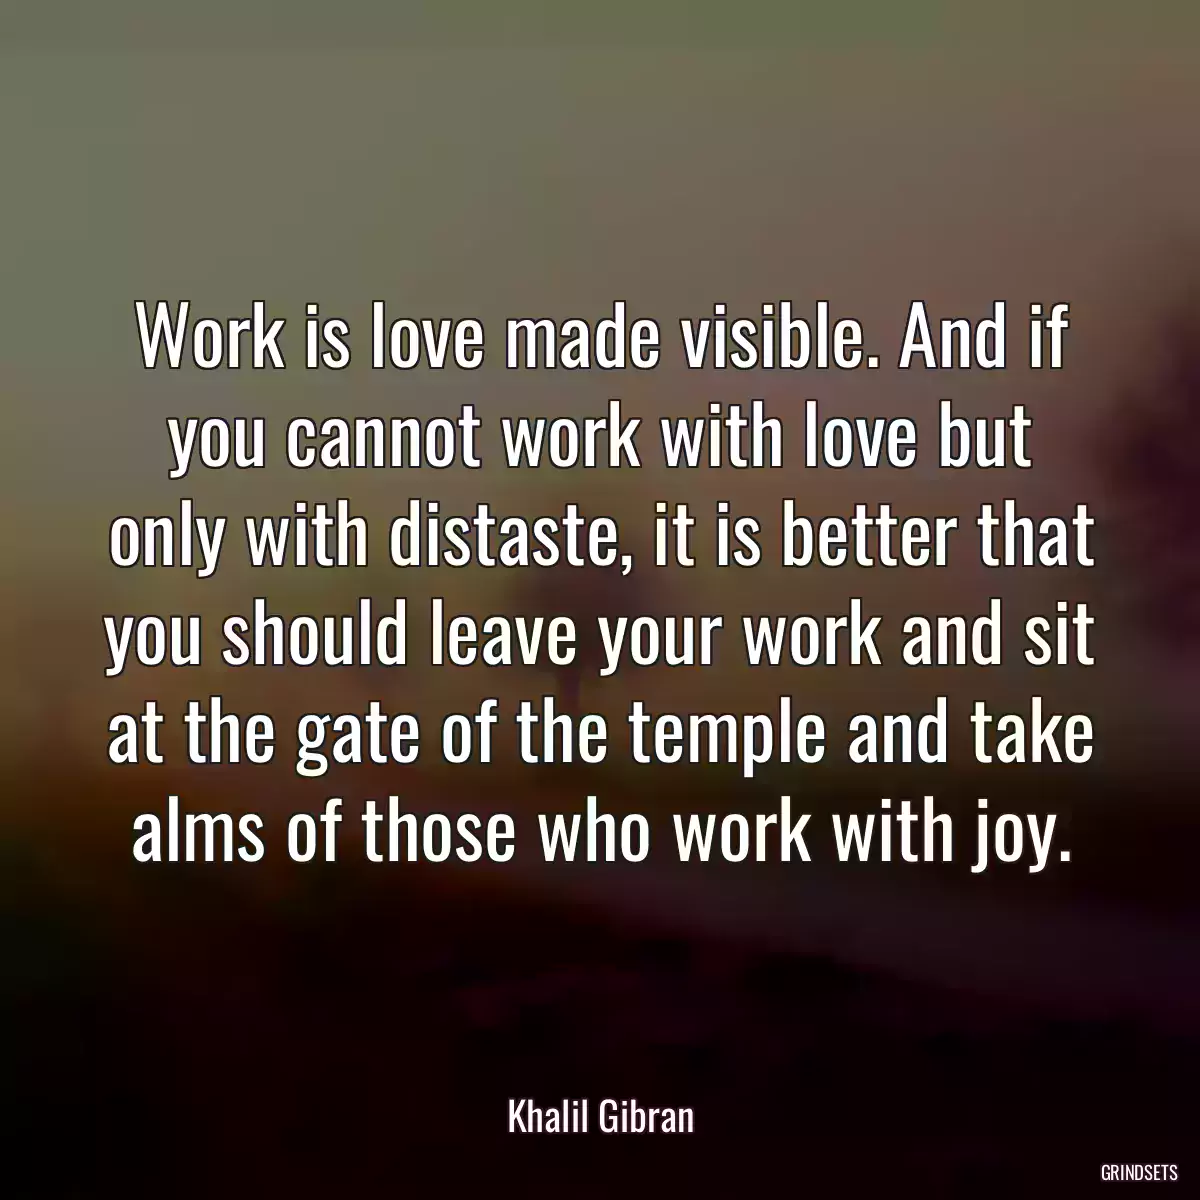 Work is love made visible. And if you cannot work with love but only with distaste, it is better that you should leave your work and sit at the gate of the temple and take alms of those who work with joy.